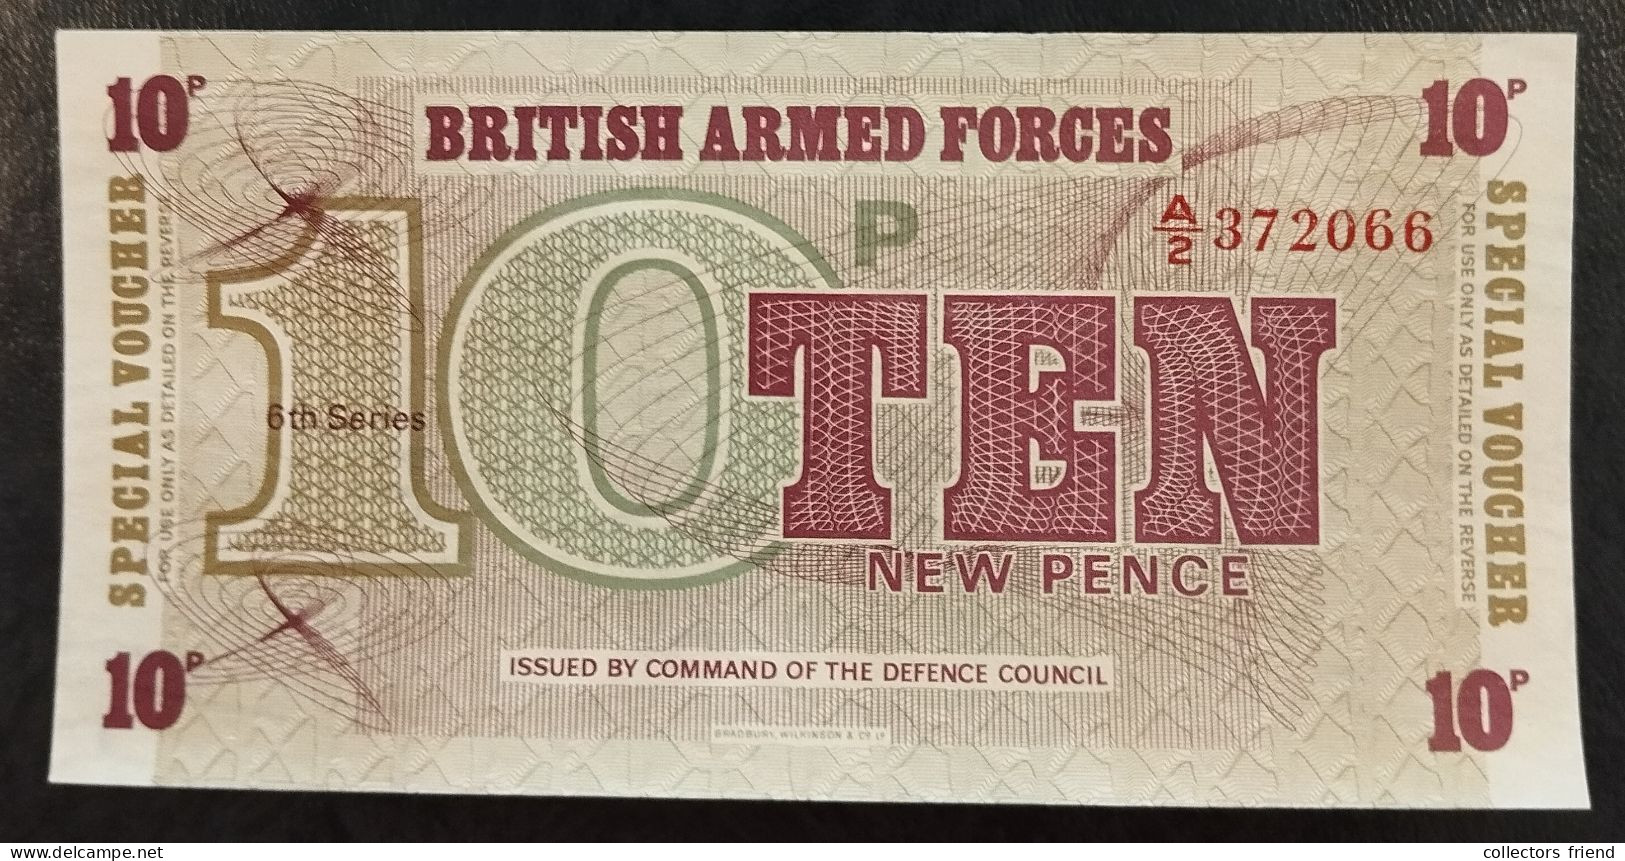 British Armed Forces - 5 + 10 New Pence - 6th Series - UNC - British Armed Forces & Special Vouchers